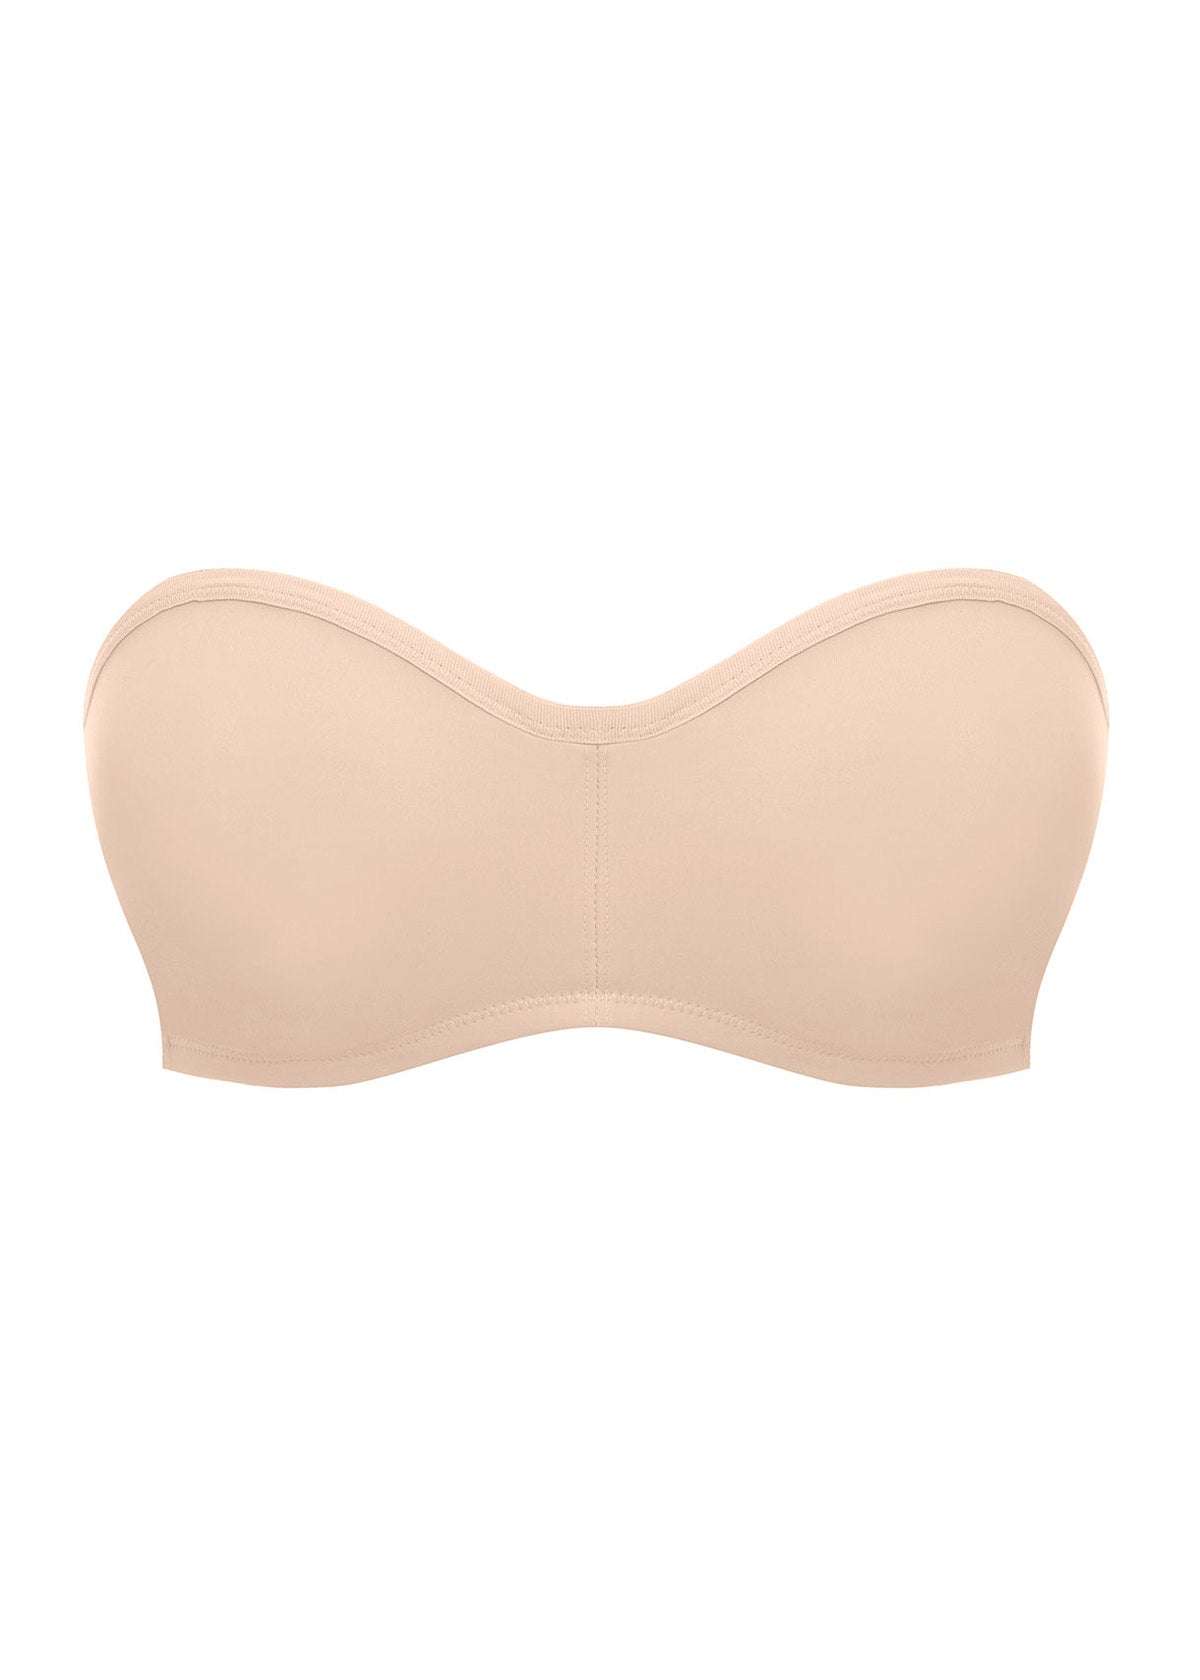 Wacoal Accord Frappe Underwired Strapless Bra